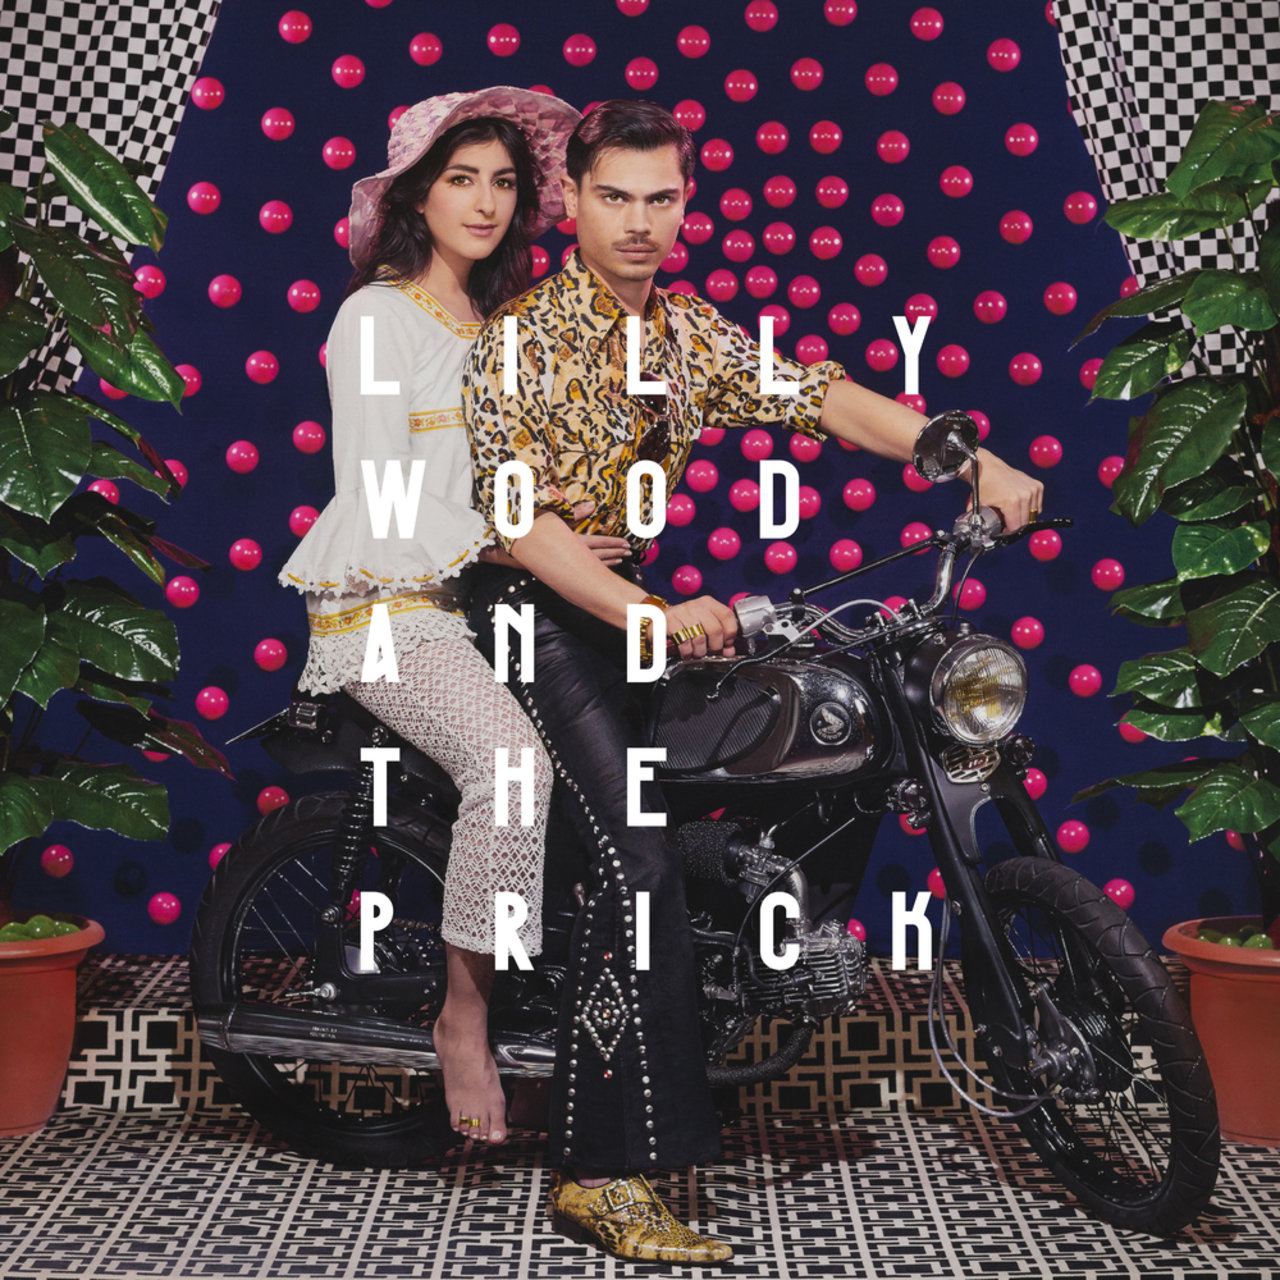 Lilly Wood and The Prick Shadows cover artwork